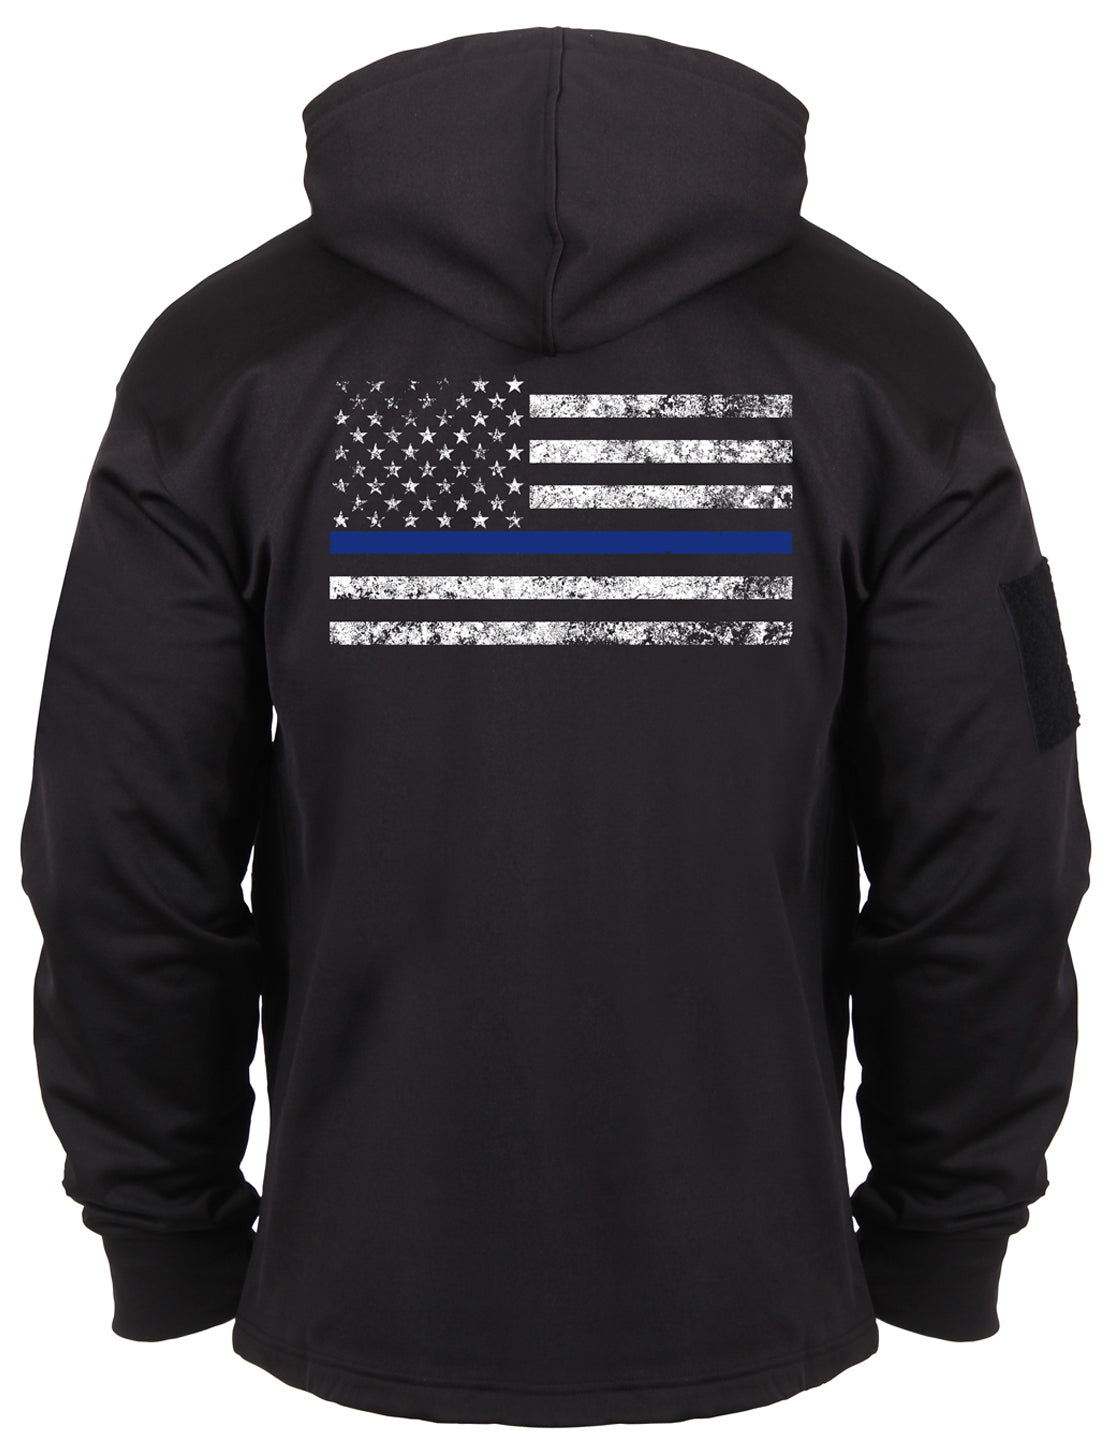 Rothco Mens Thin Blue Line Police Sweat Shirt Concealed Carry Hoodie Sweatshirt